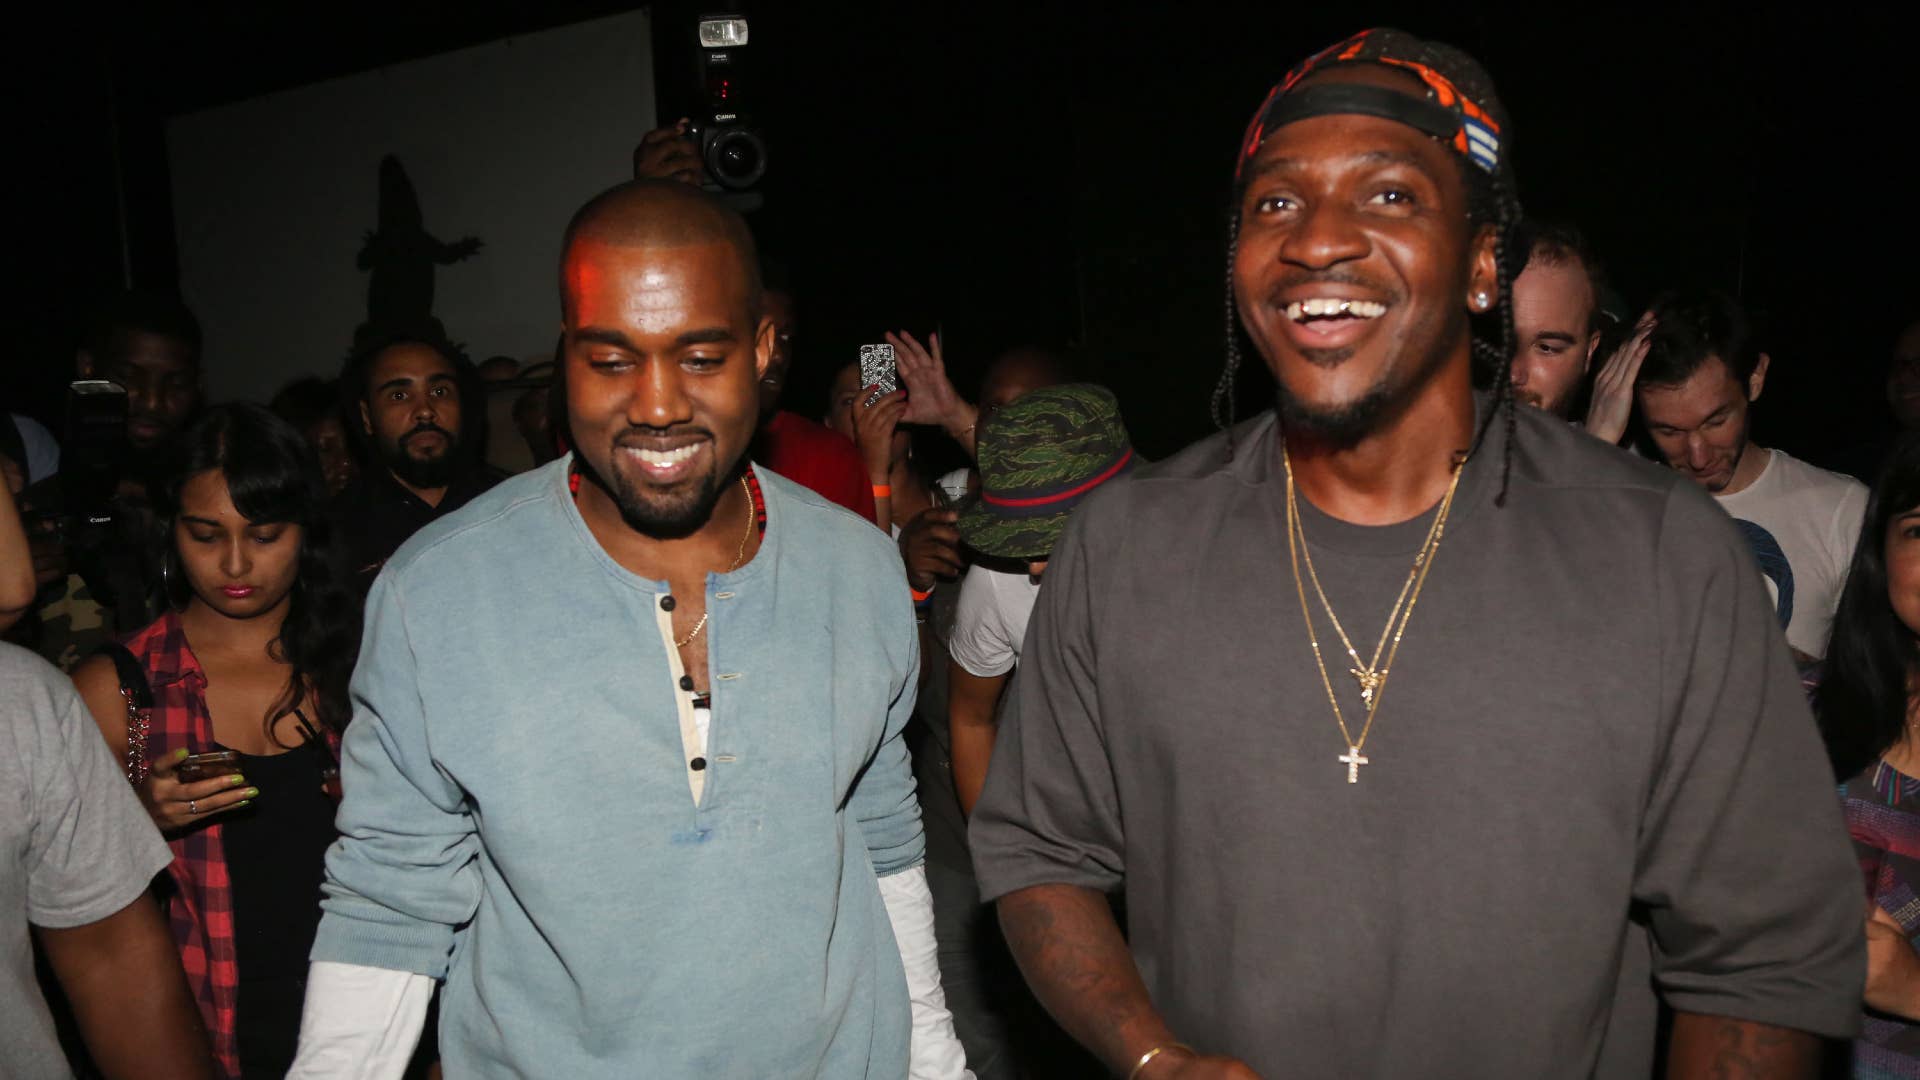 Ye and Pusha T are pictured smiling together at an event